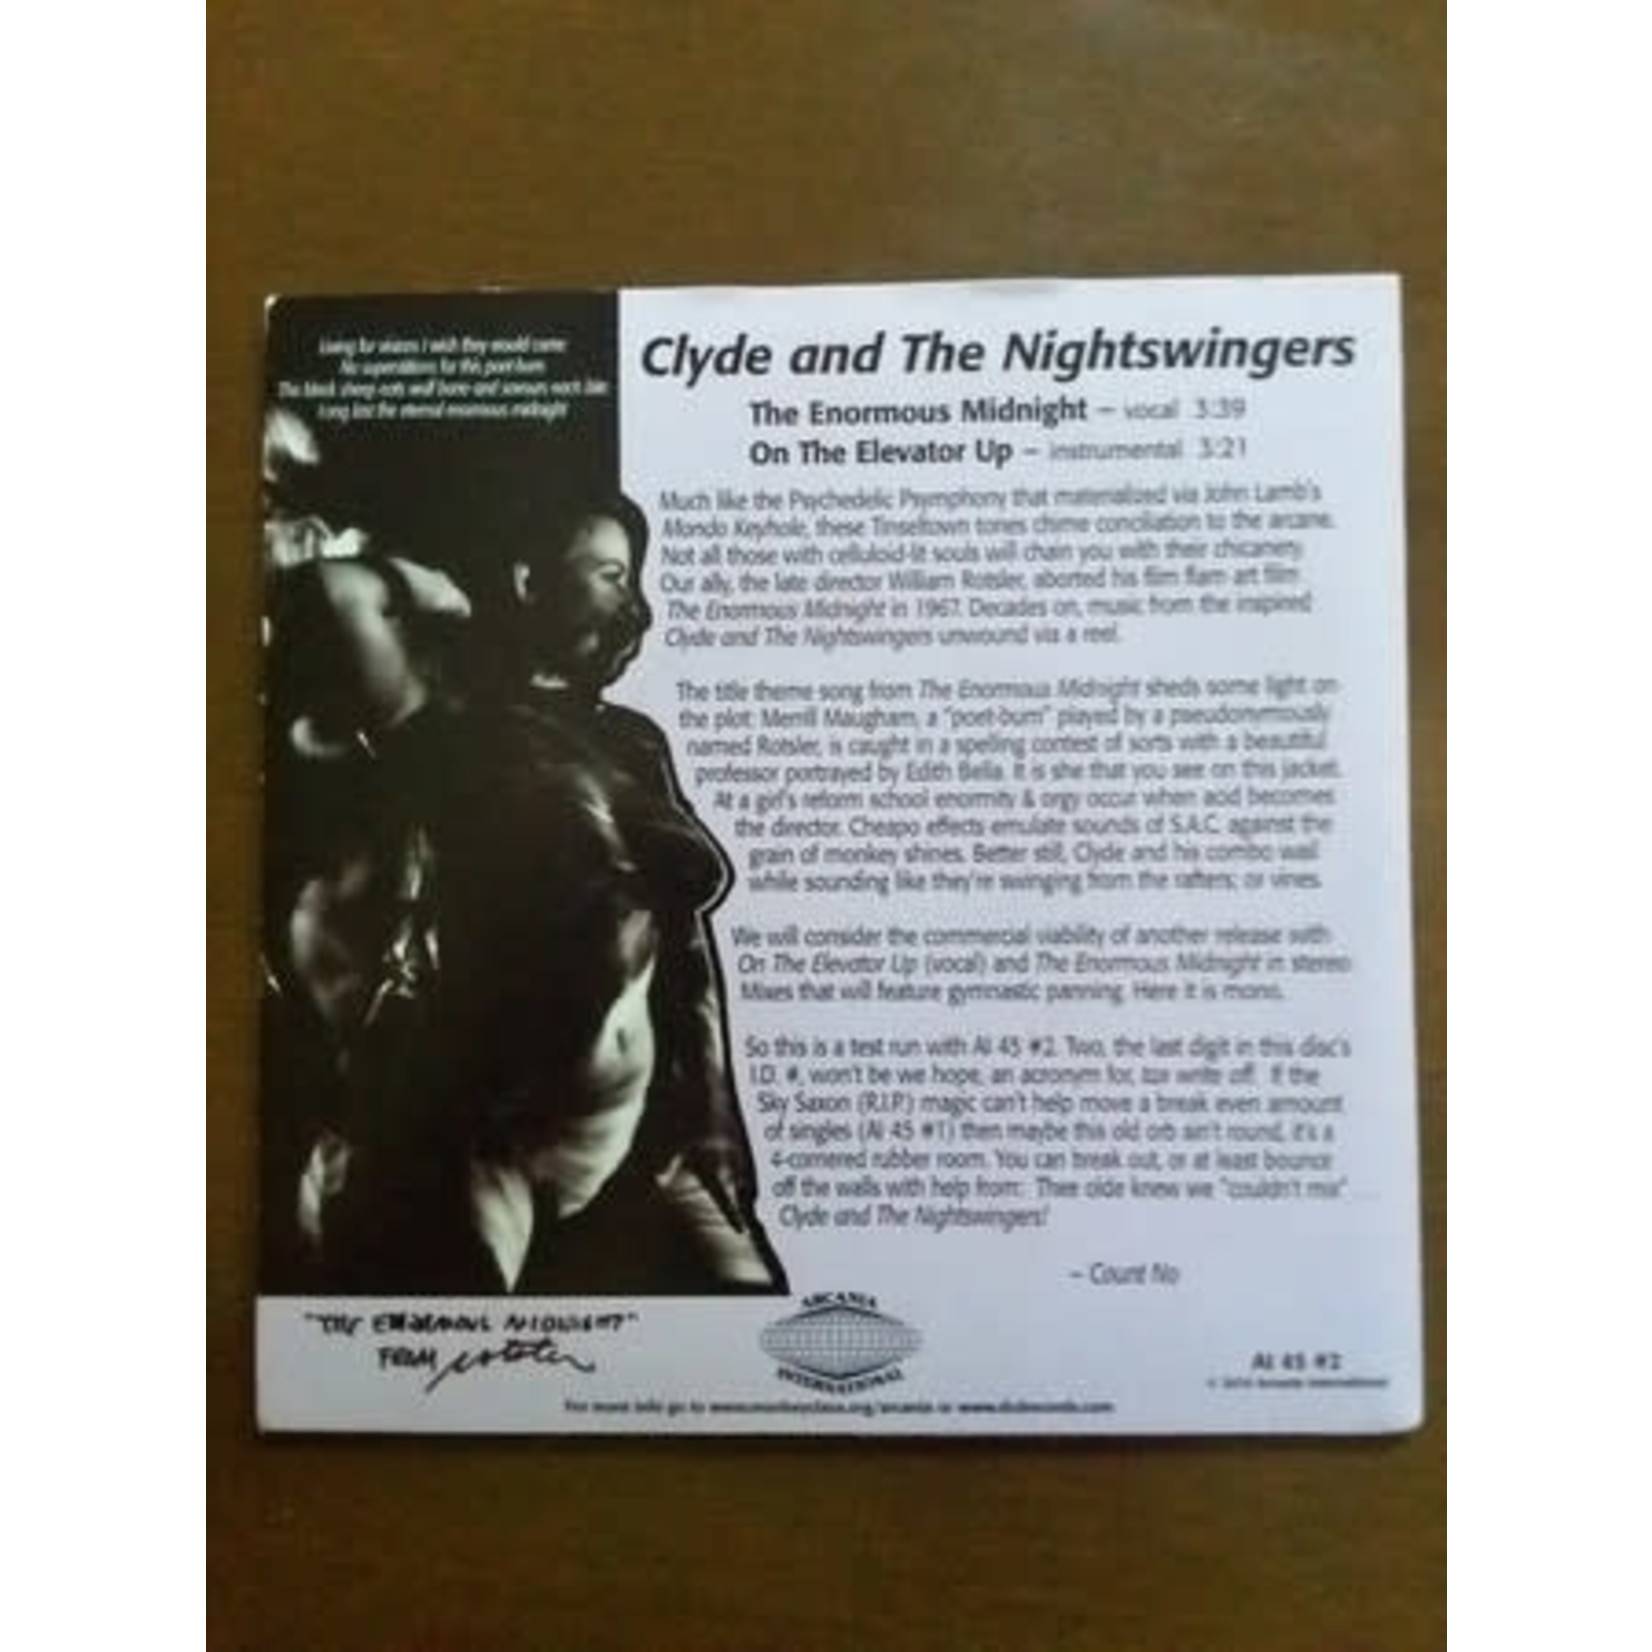 Clyde And The Nightswingers - The Enormous Midnight (7") {VG+/VG+}